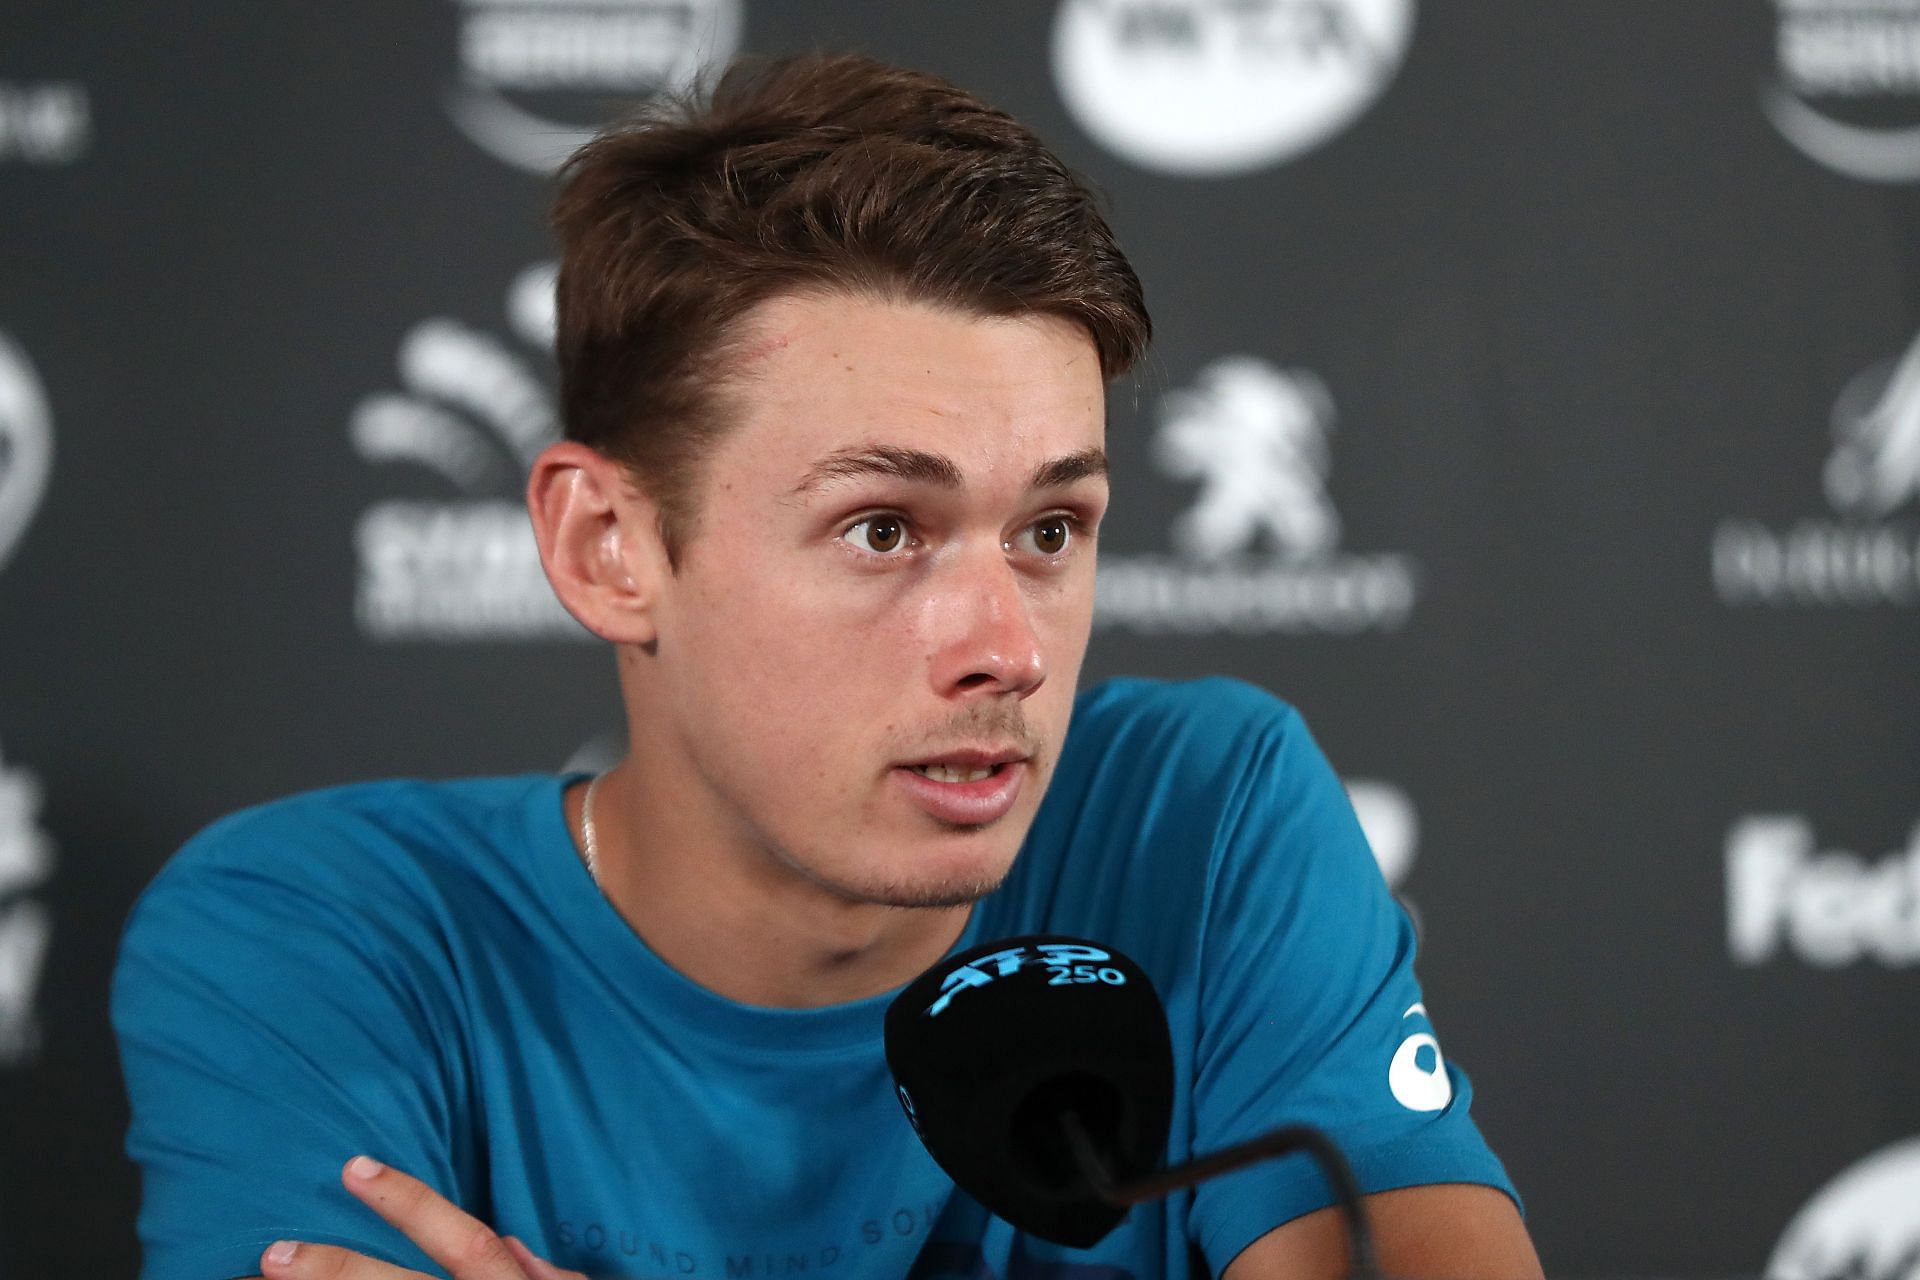 Alex de Minaur clarified his vaccination status amid reports that he had falsified his vaccination certificate